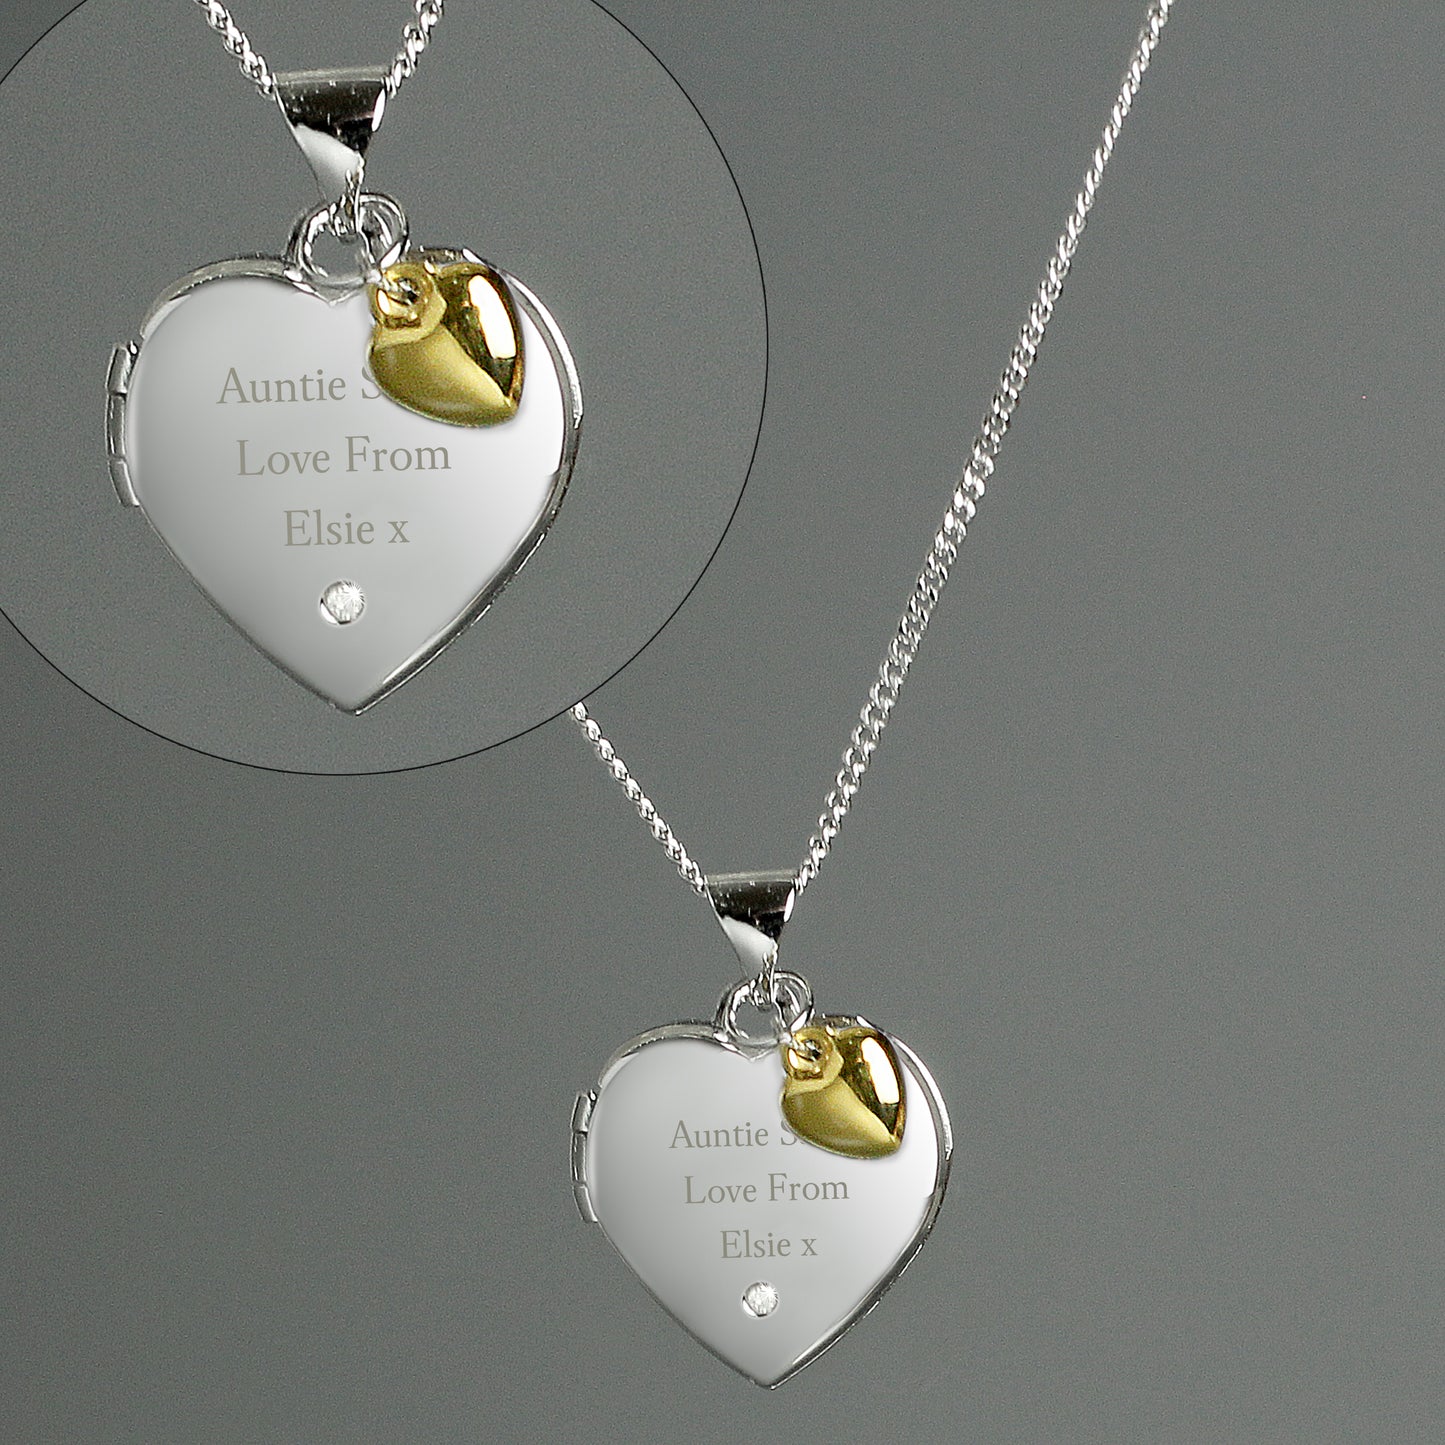 sterling silver heart shaped locket with engraved message and tiny gold heart, close up view